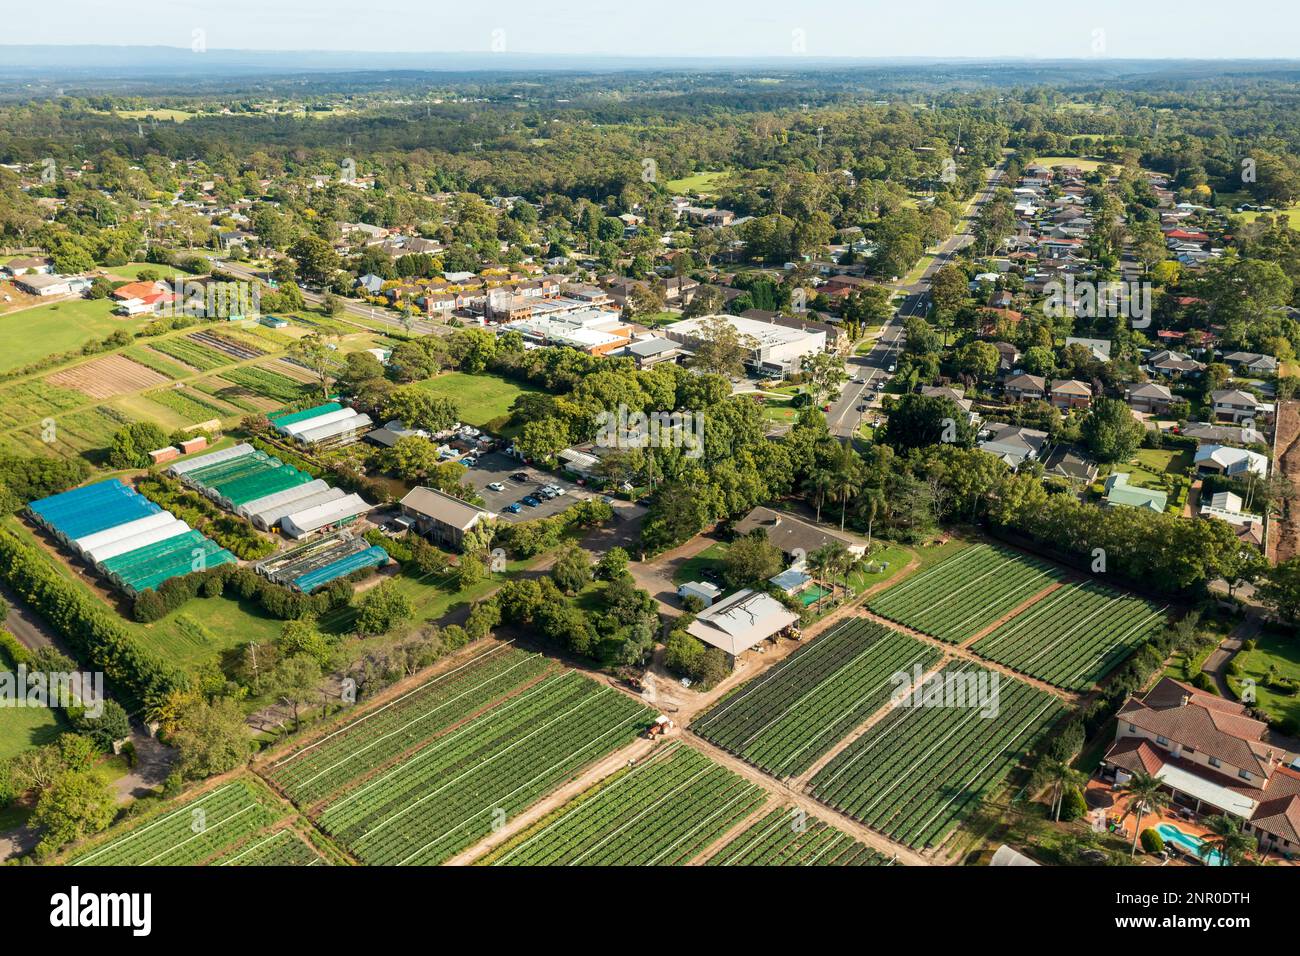 Aerial view of houses, shops and farms in the semi-rural outer Sydney township of Galston, NSW, Australia. Stock Photo